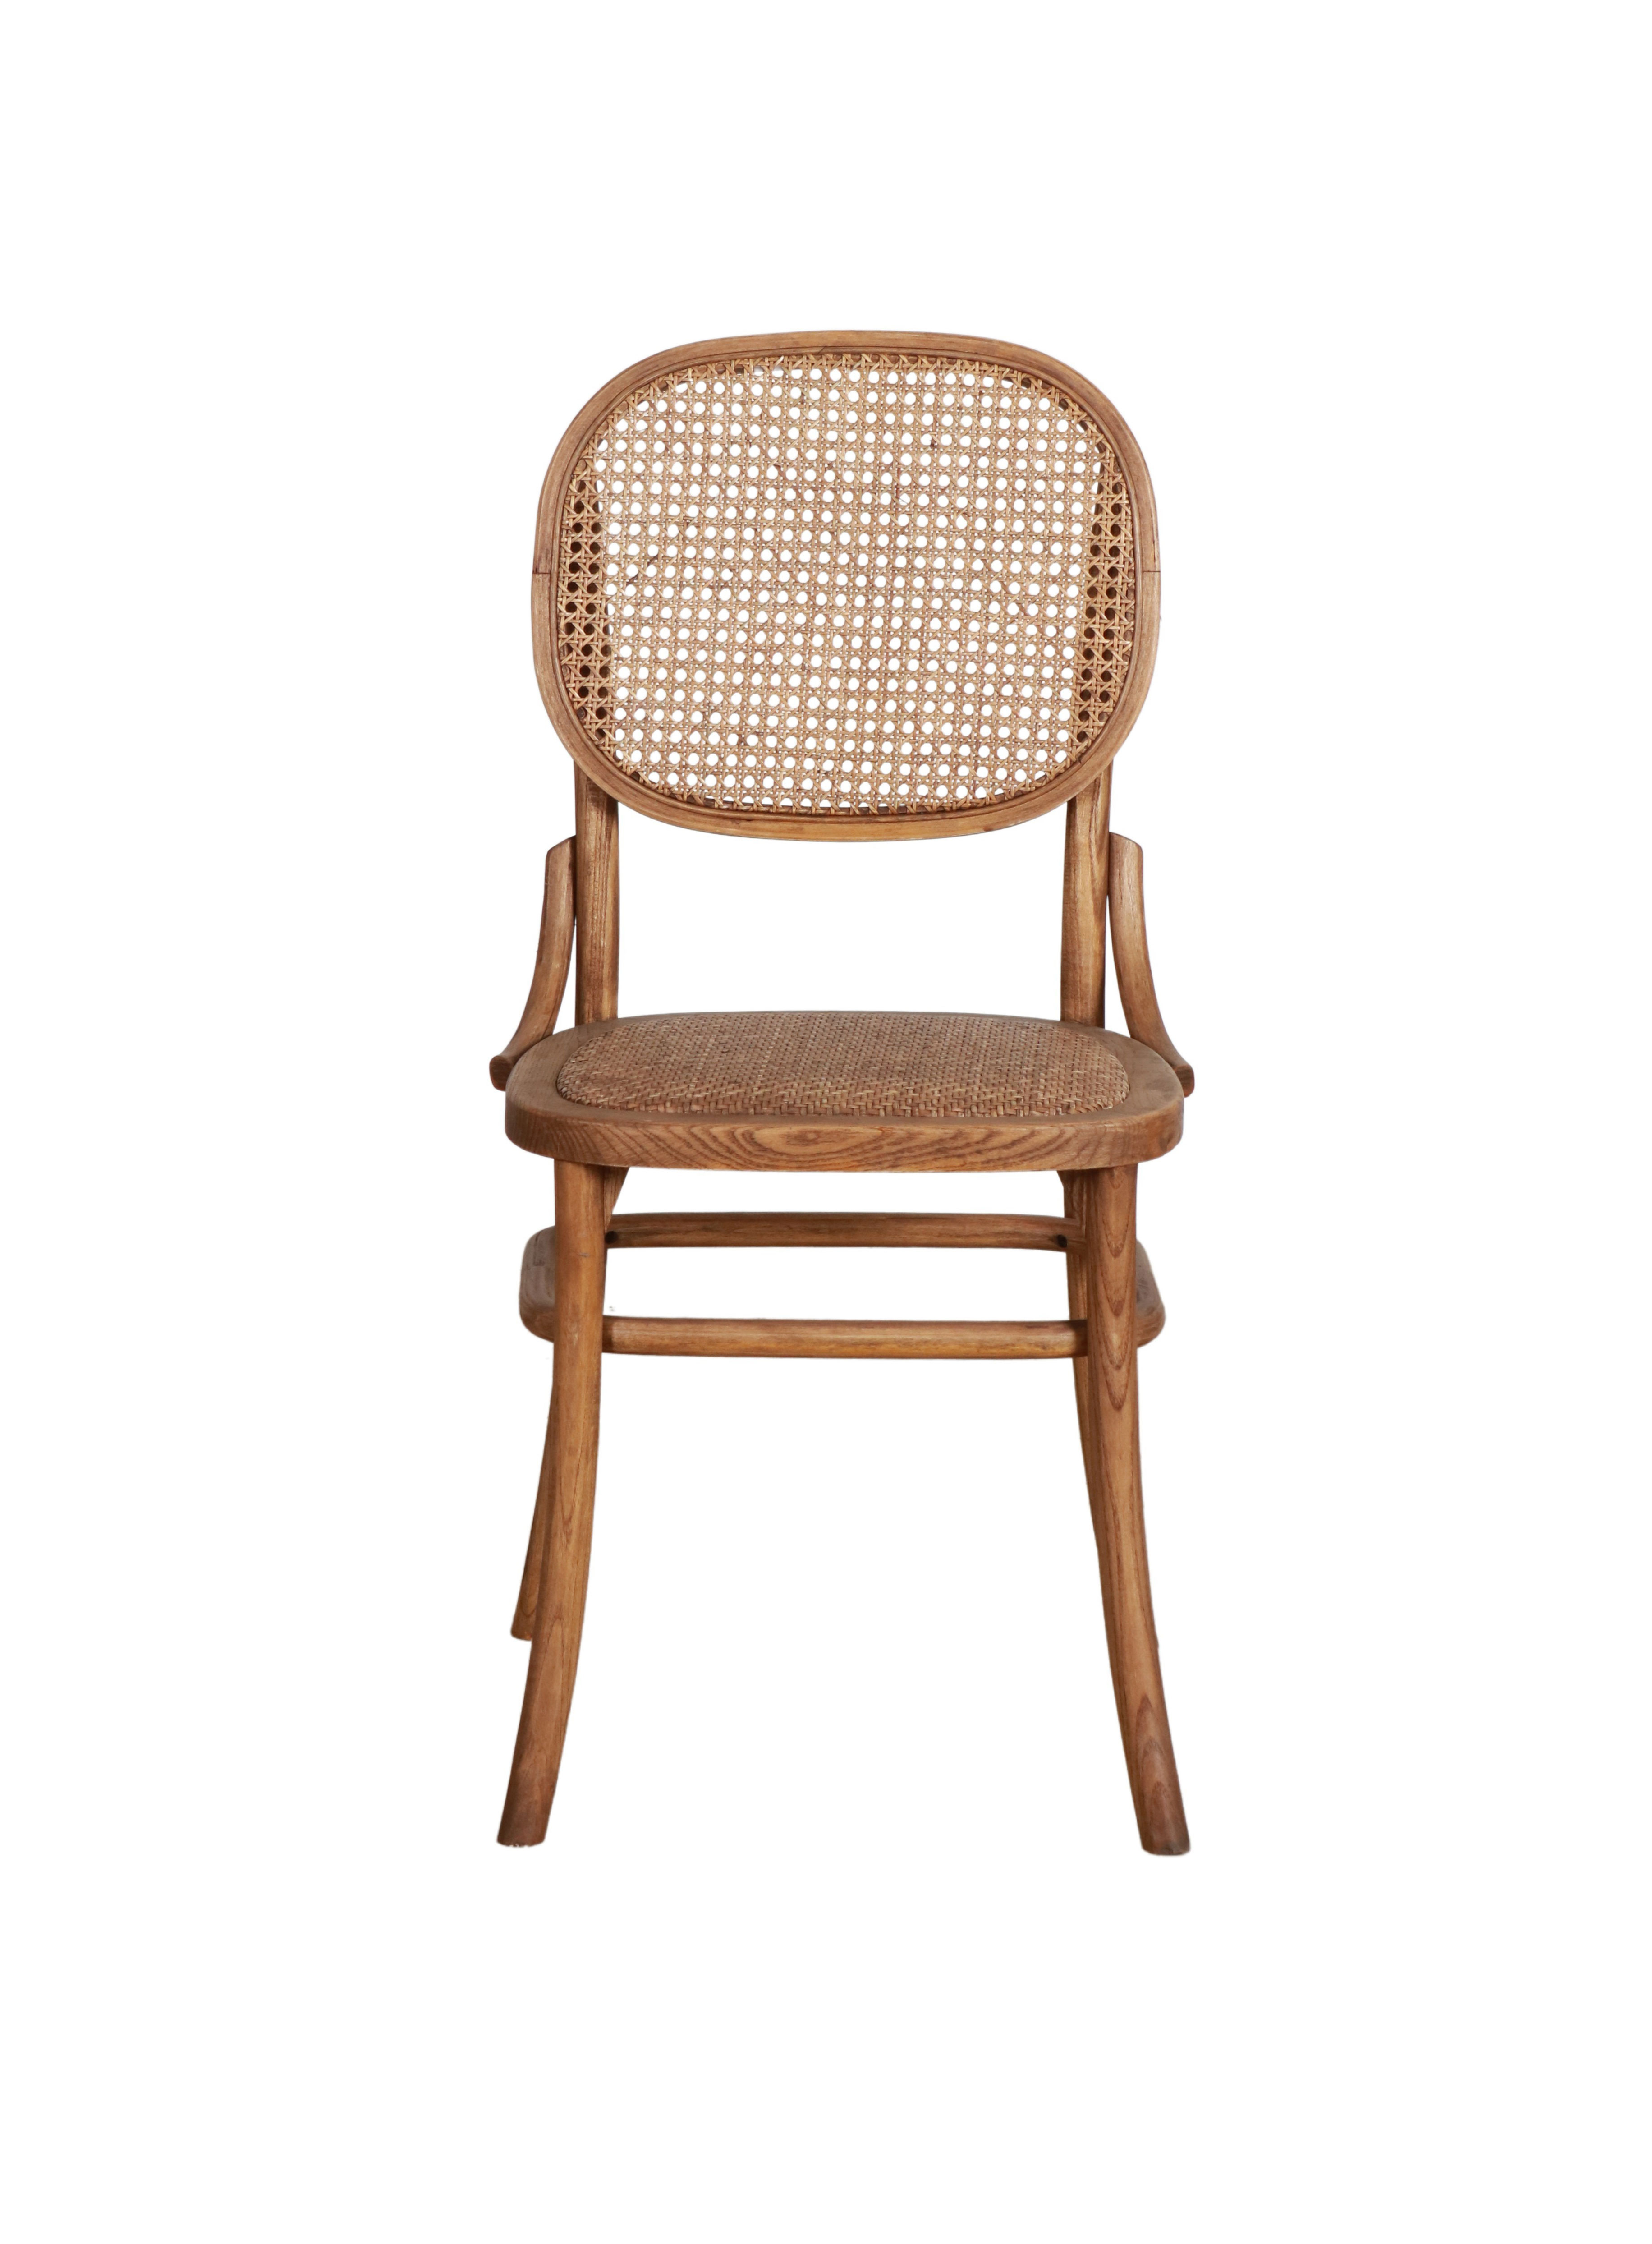 chinese oak dining chair with rattan back